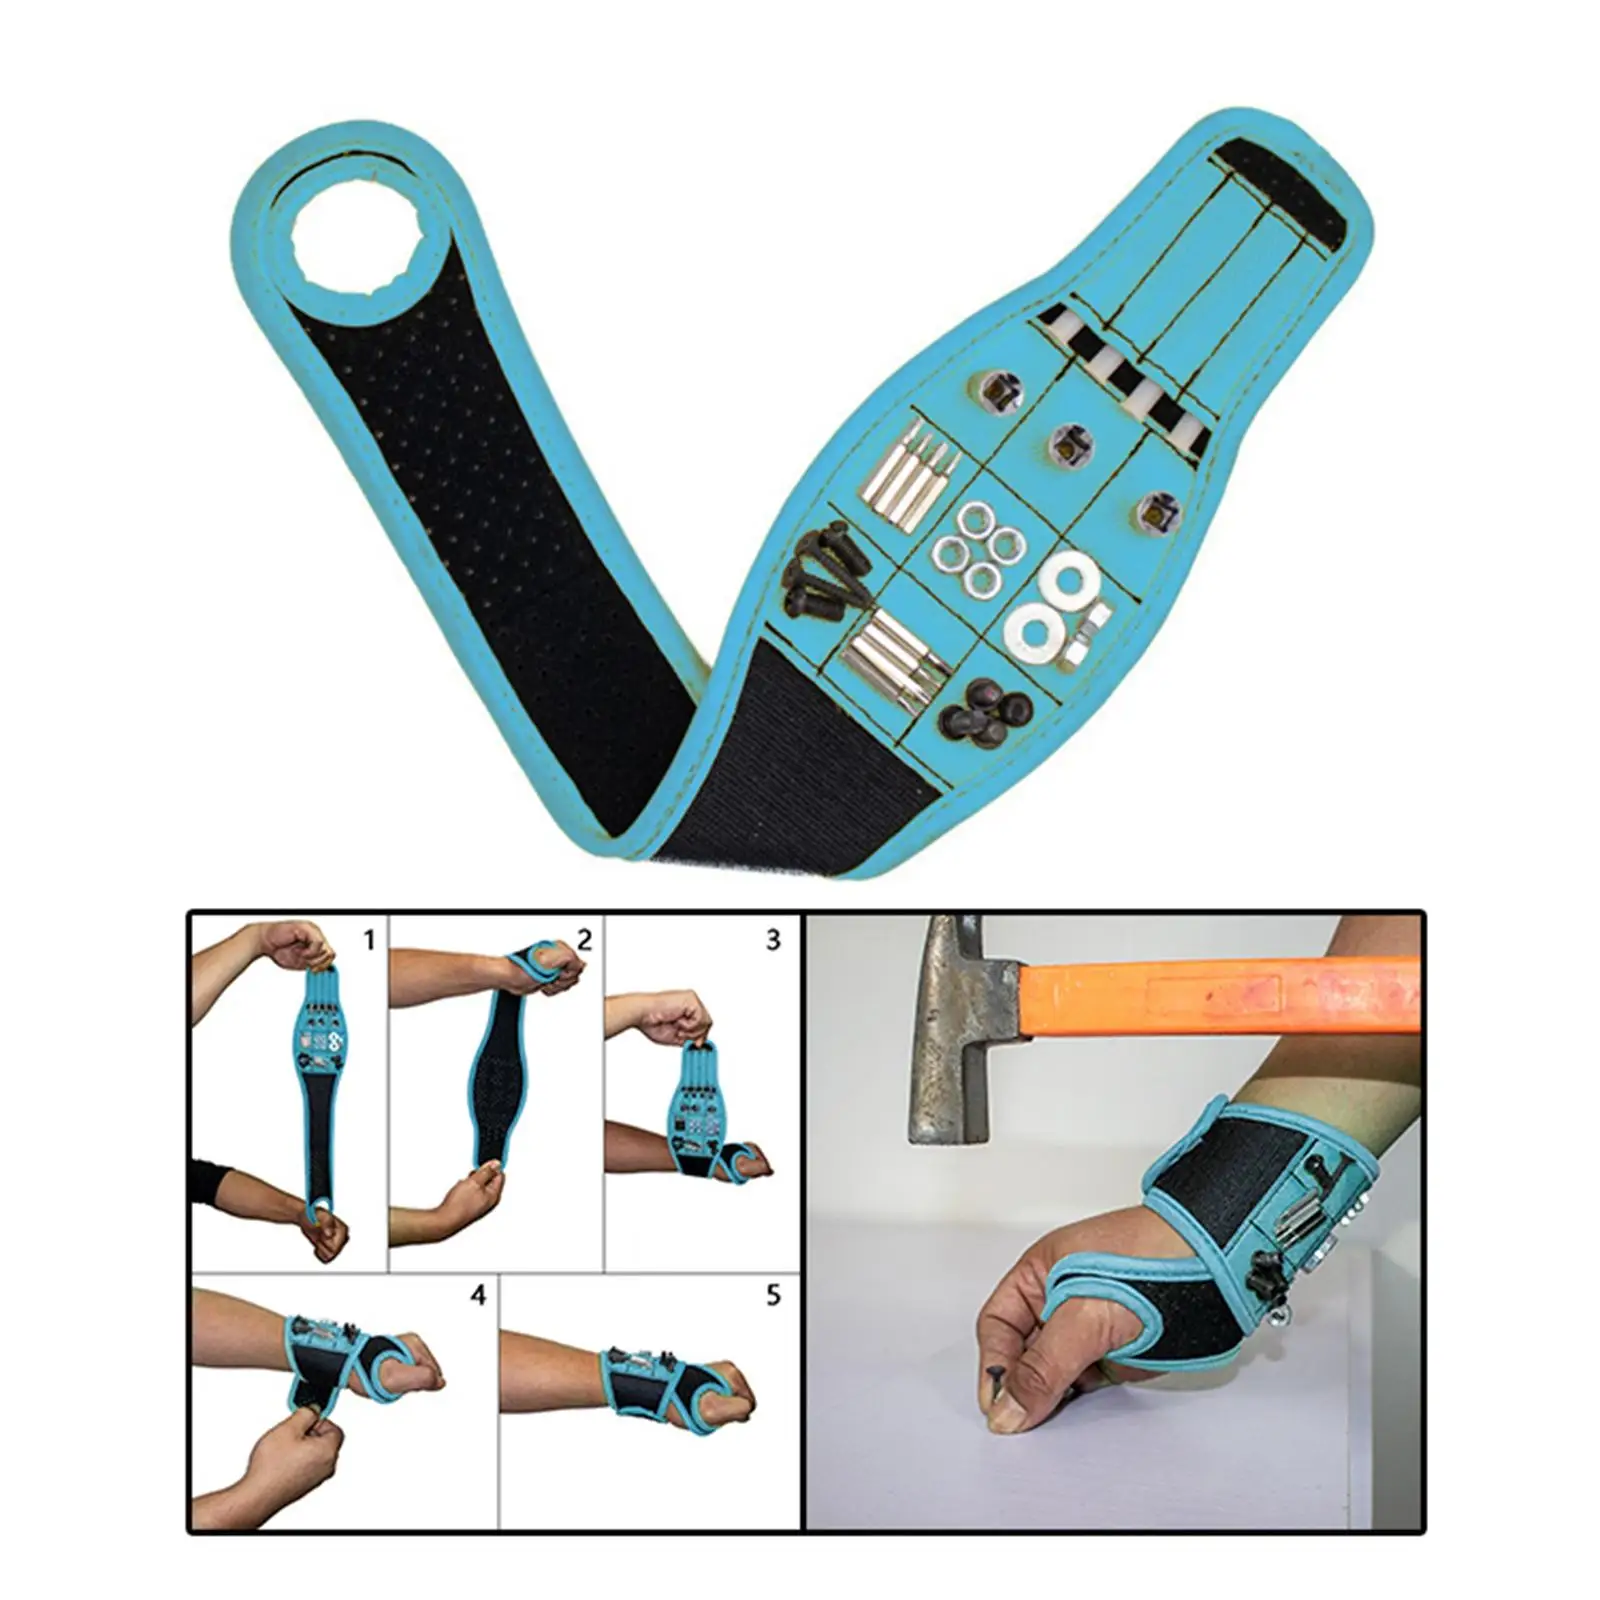 Magnetic Wristband, Holder Organiser with 9 Magnets Tool Bracelet for Holding Screws Bits Fasteners Handyman Dad